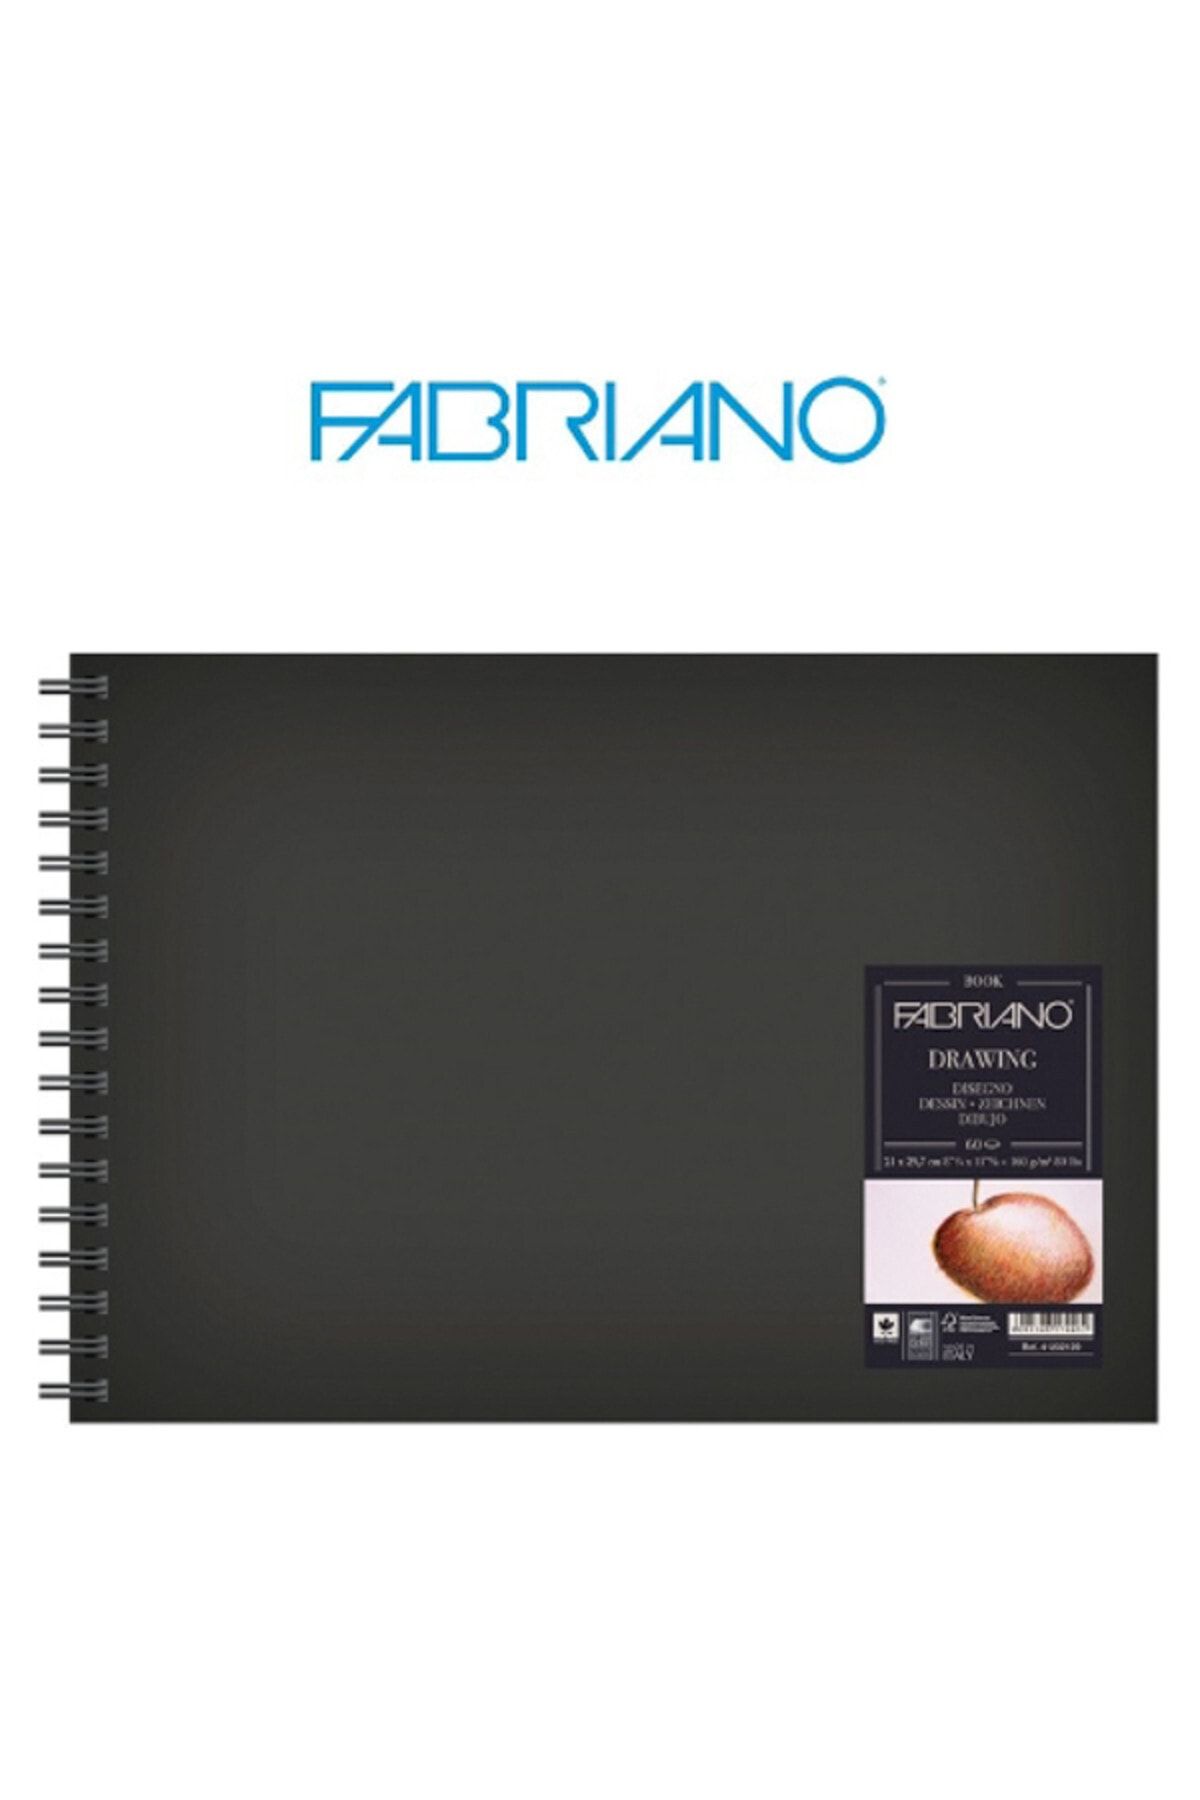 Fabriano Drawing Book Natural Dokulu, 160gr, 14,8x21cm 225374